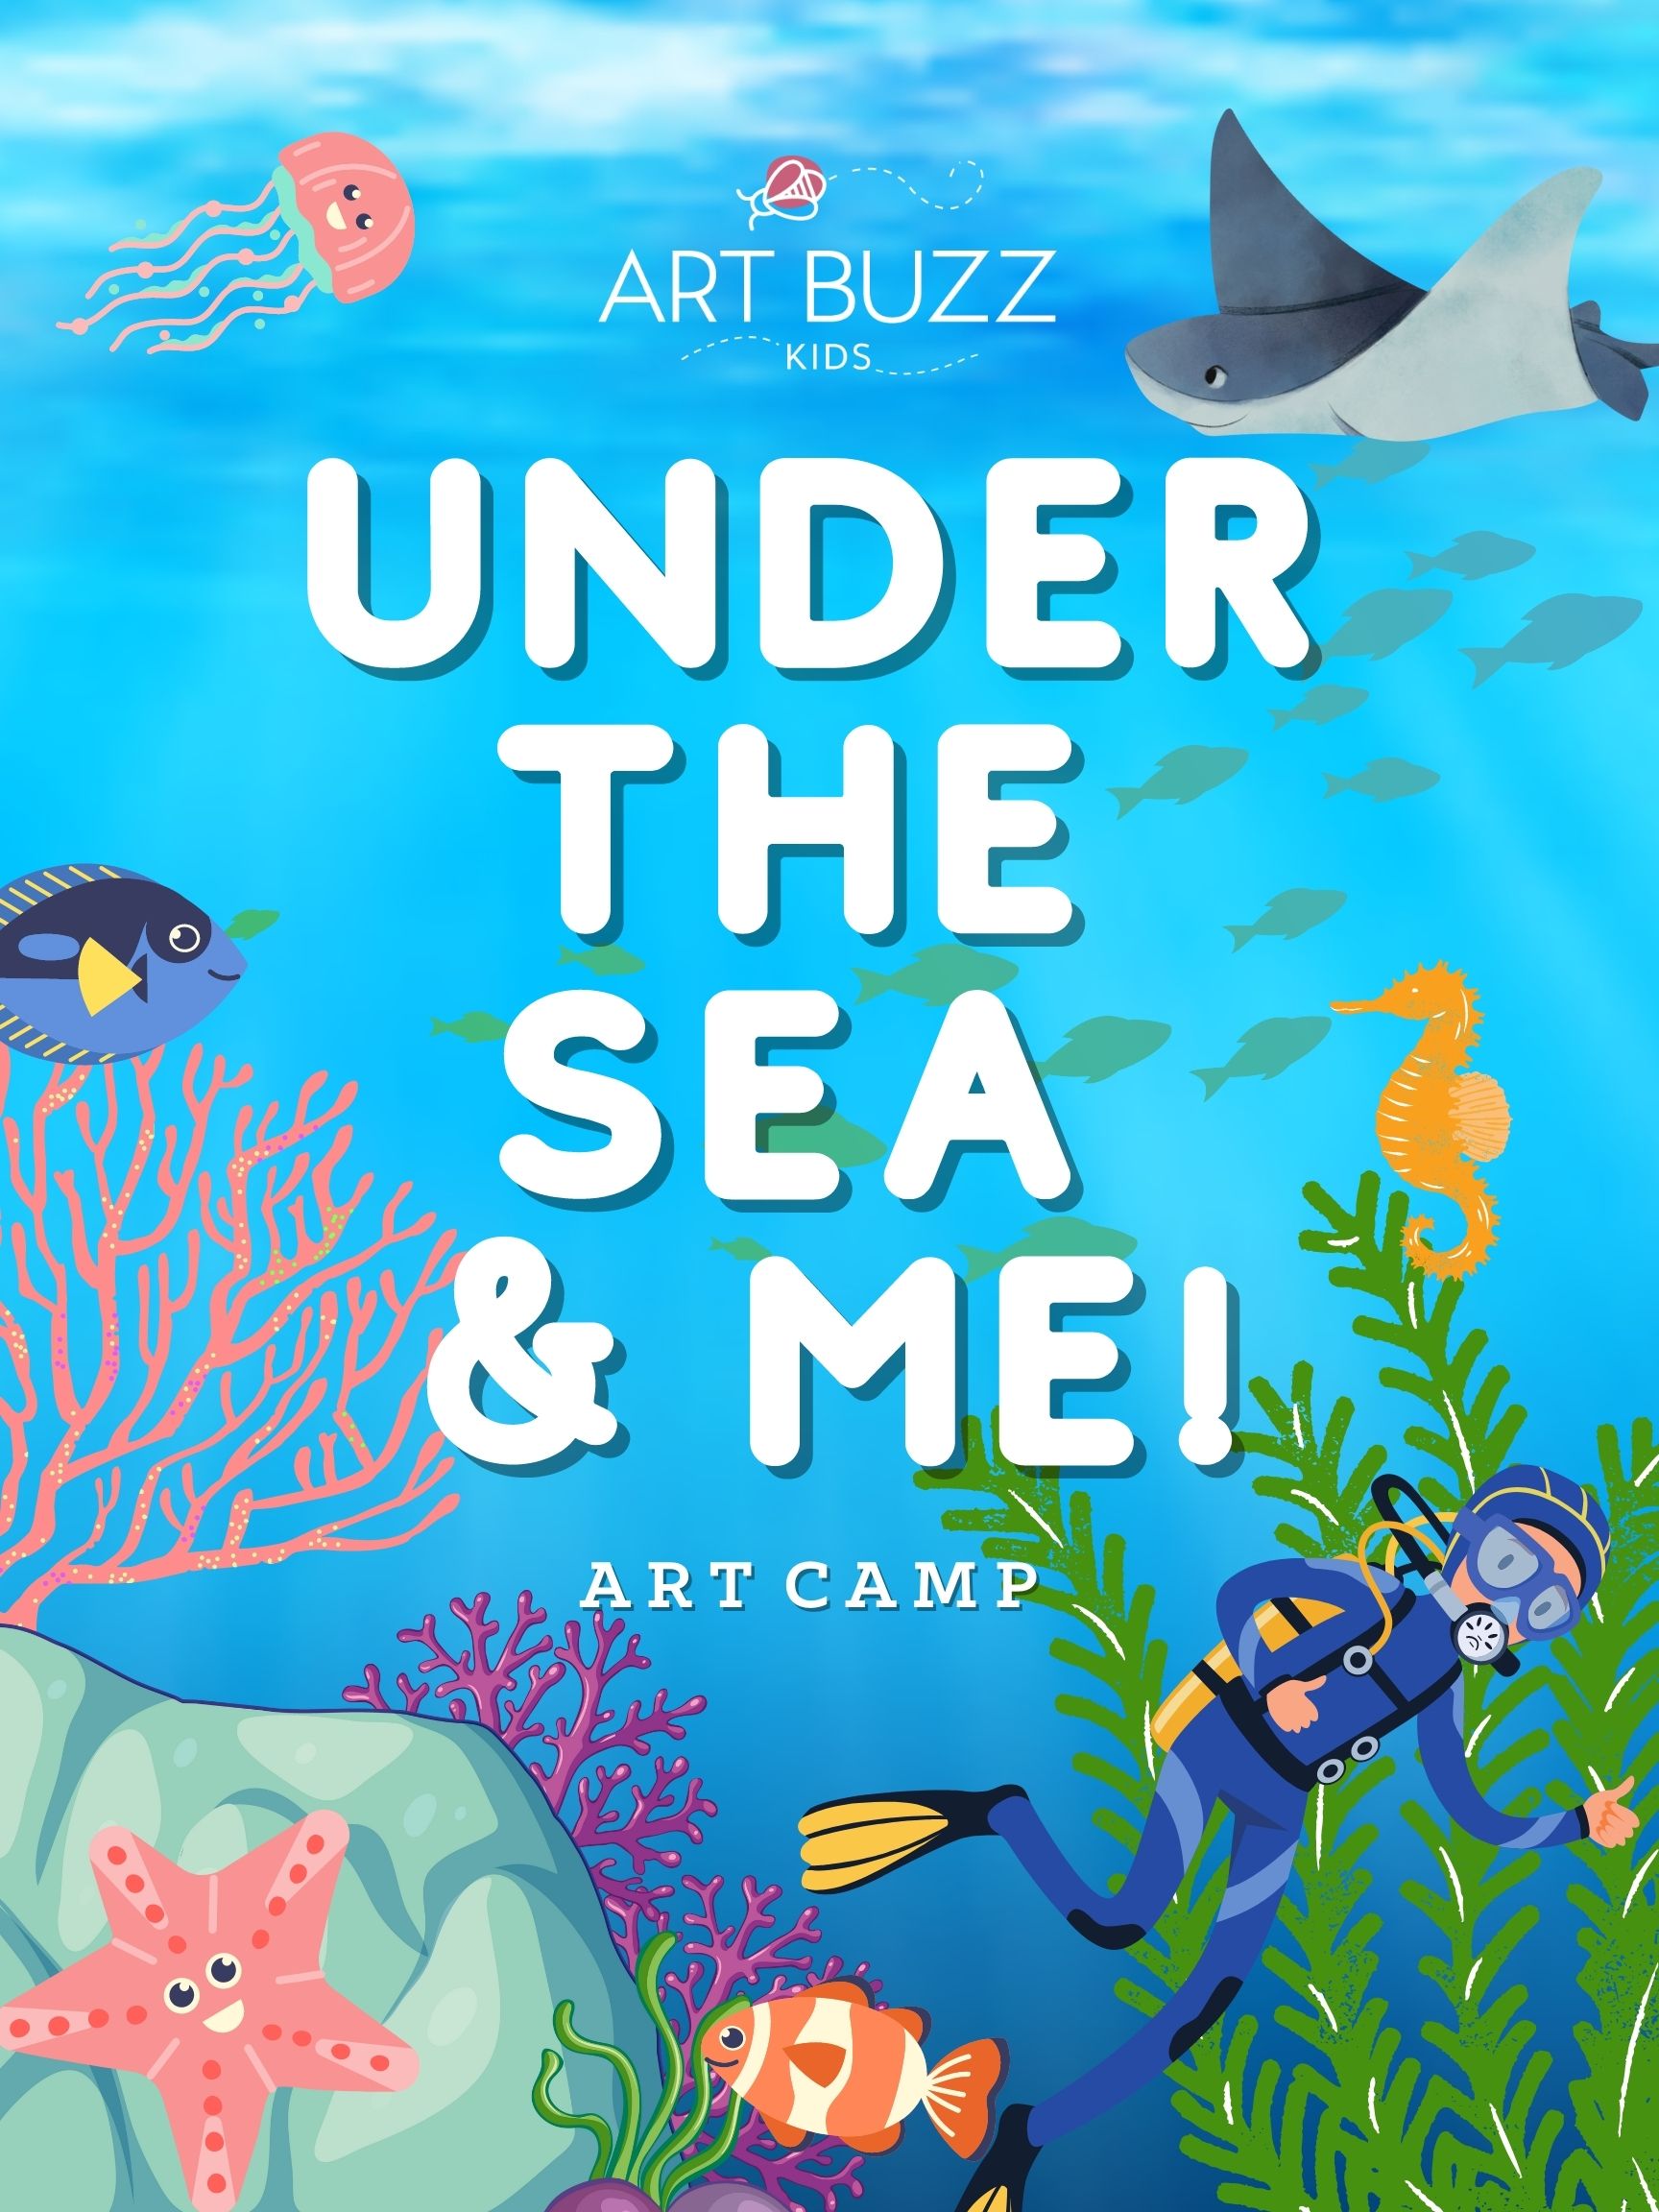 HALF DAY-WEEK | Under The Sea Camp! August 21st-25th 9:00am-1:00pm